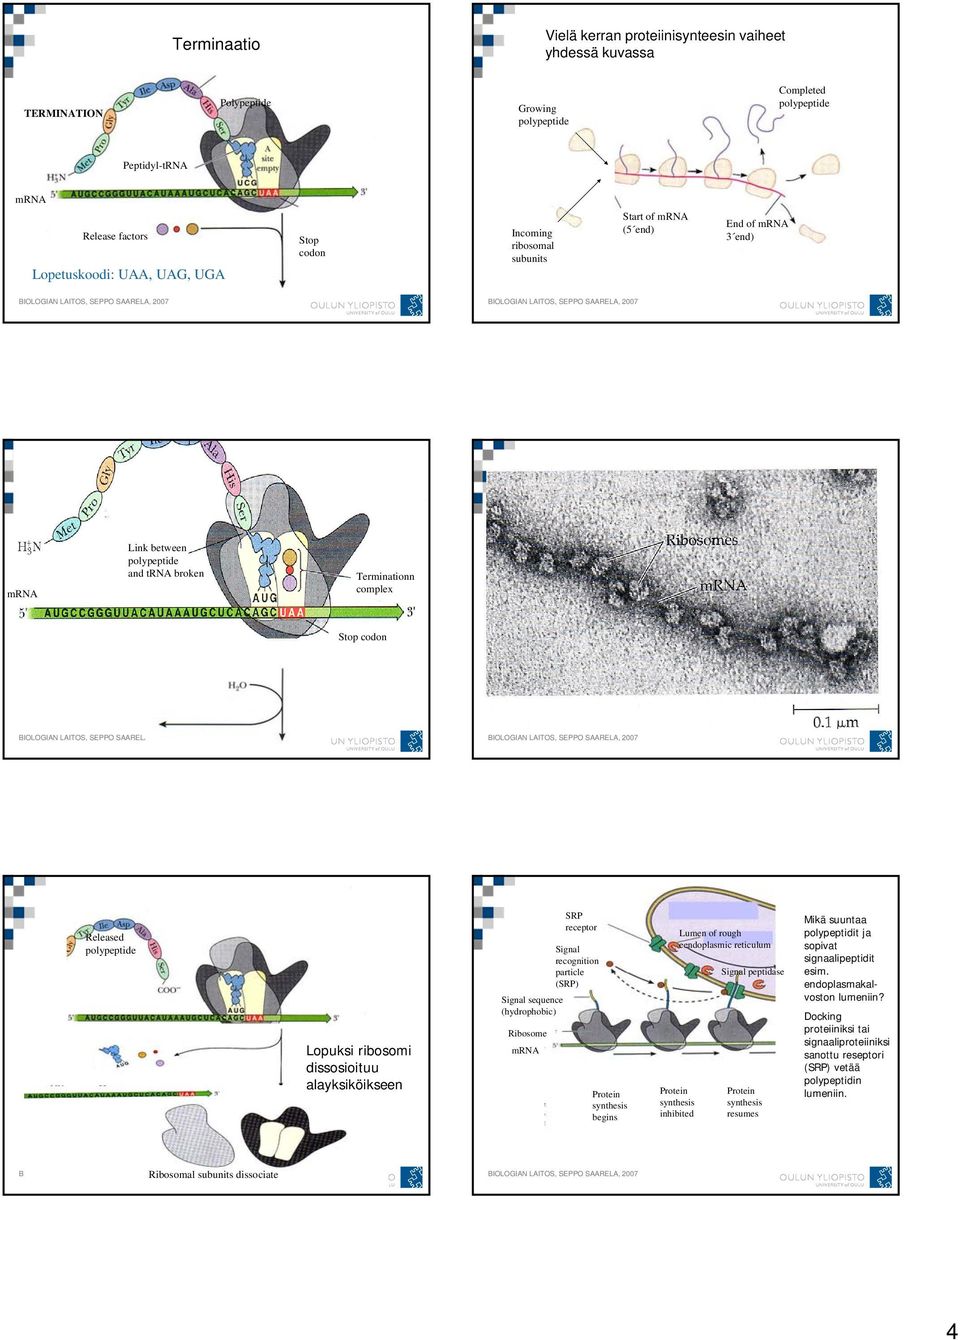 Signal recognition particle (SRP) Signal sequence (hydrophobic) Ribosome mrna Protein synthesis begins Lumen of rough eendoplasmic reticulum Protein synthesis inhibited Signal peptidase Protein